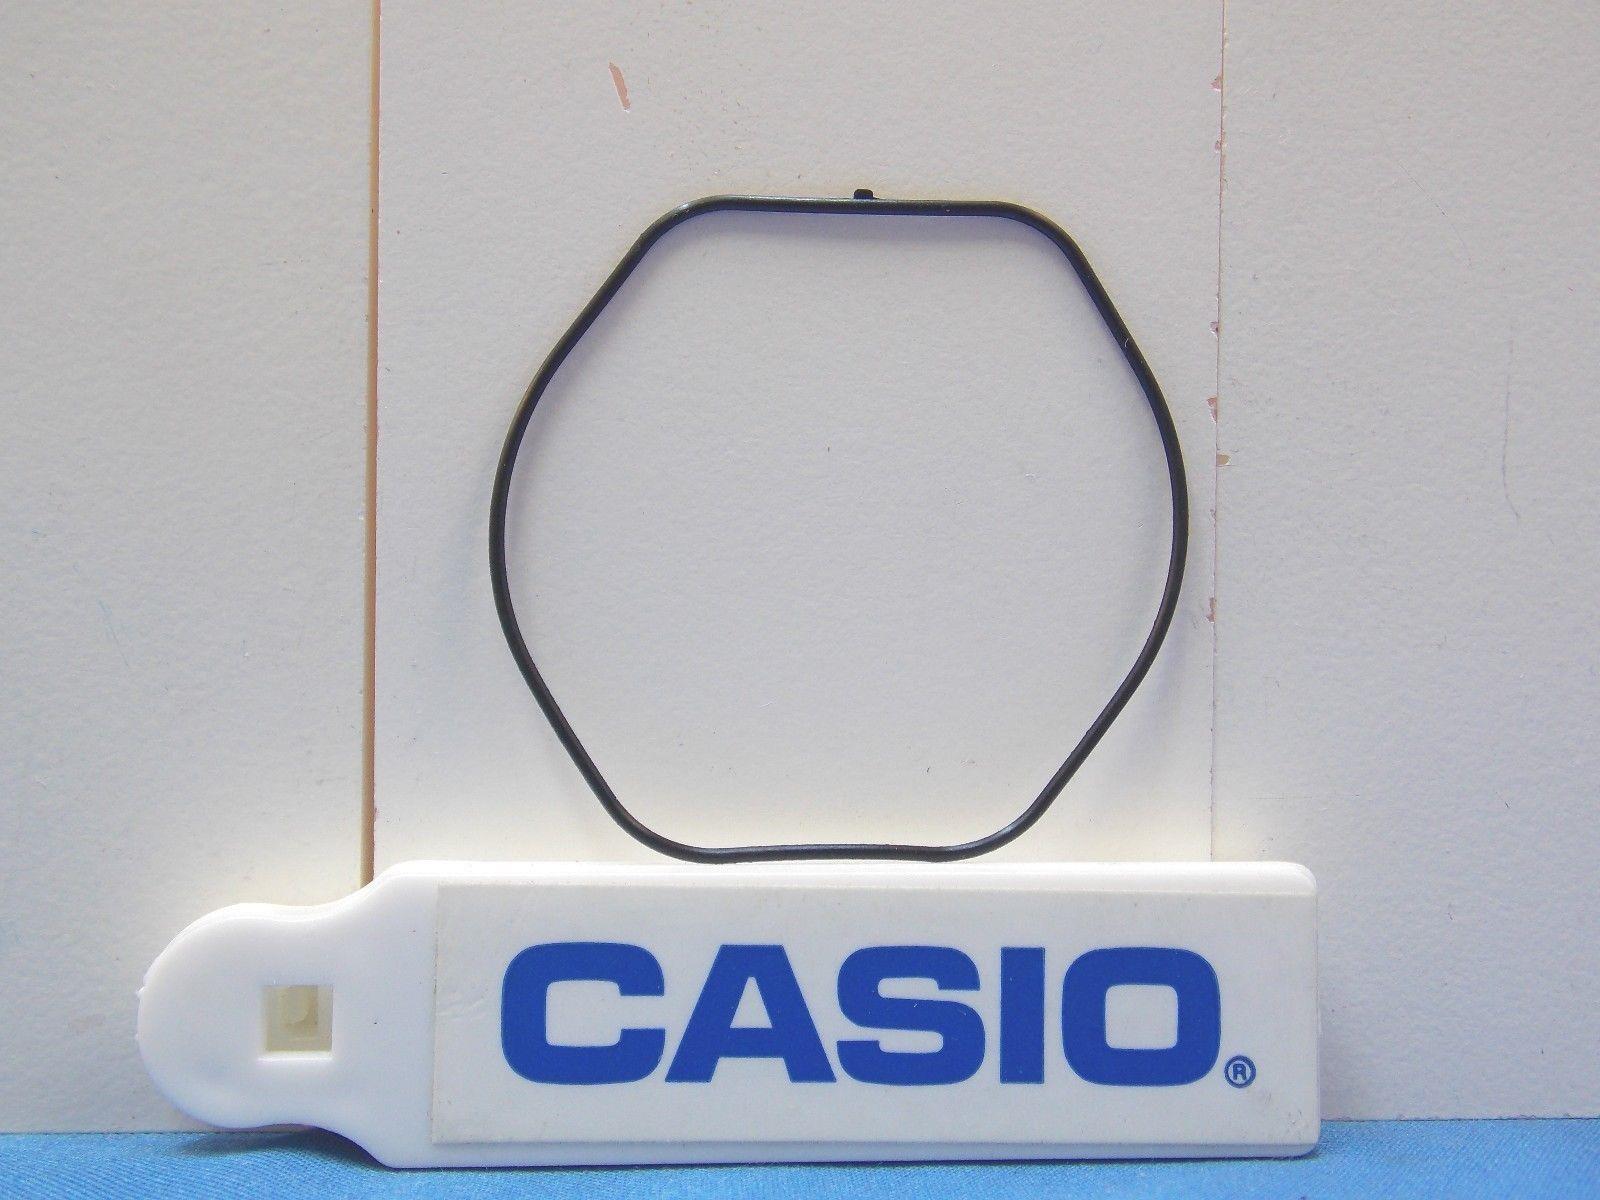 Casio Watch Parts DW-9052, DW-9500 Back Plate Gasket Also Fits These Models: